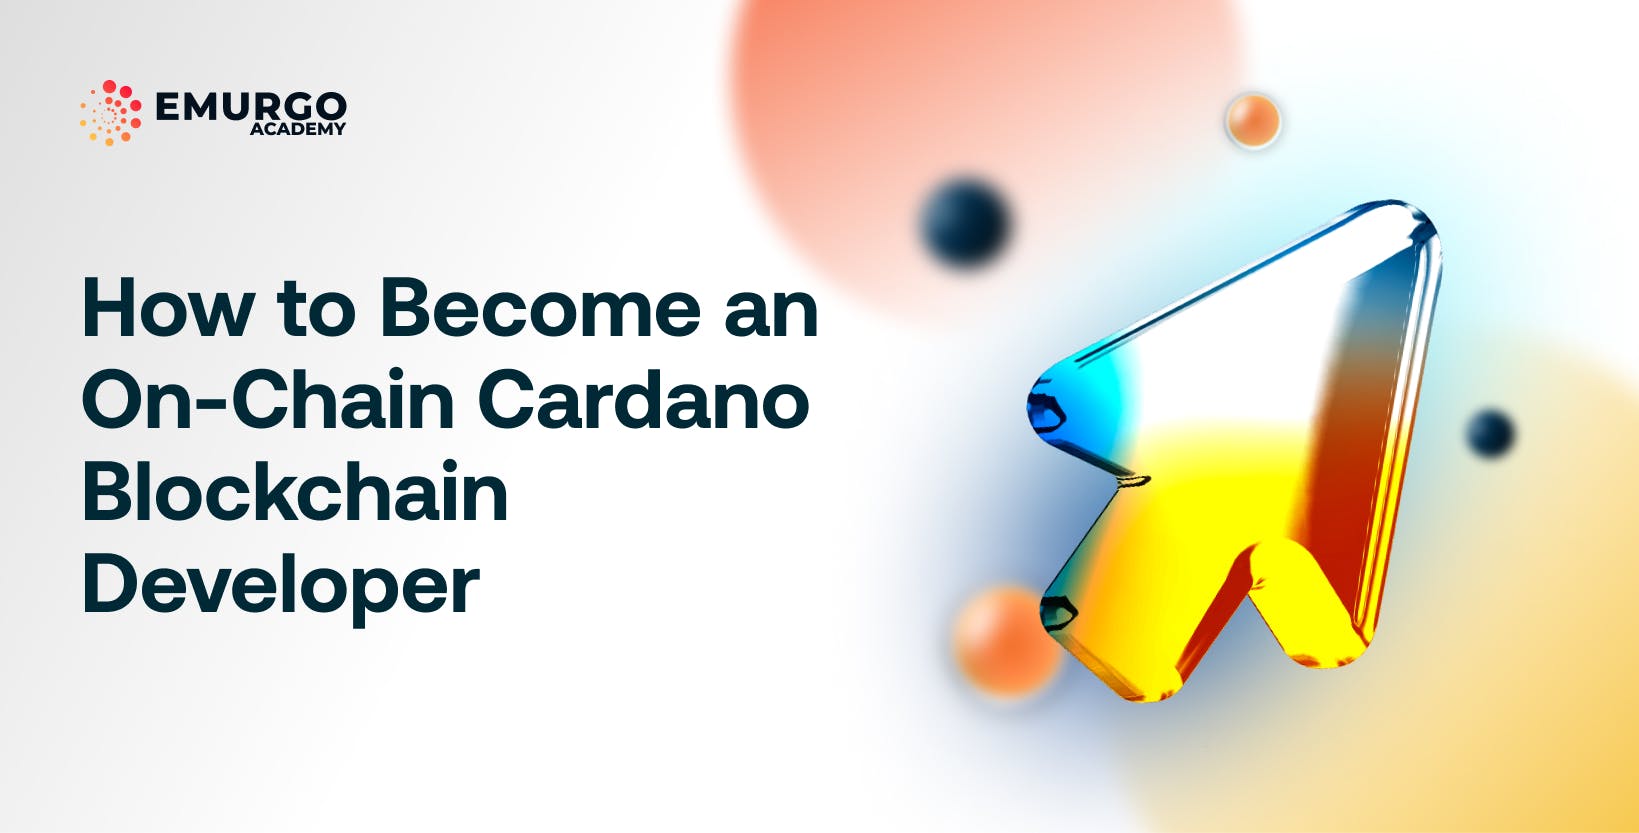 How-to-Become-an-On-Chain-Cardano-Blockchain-Developer-Artboard